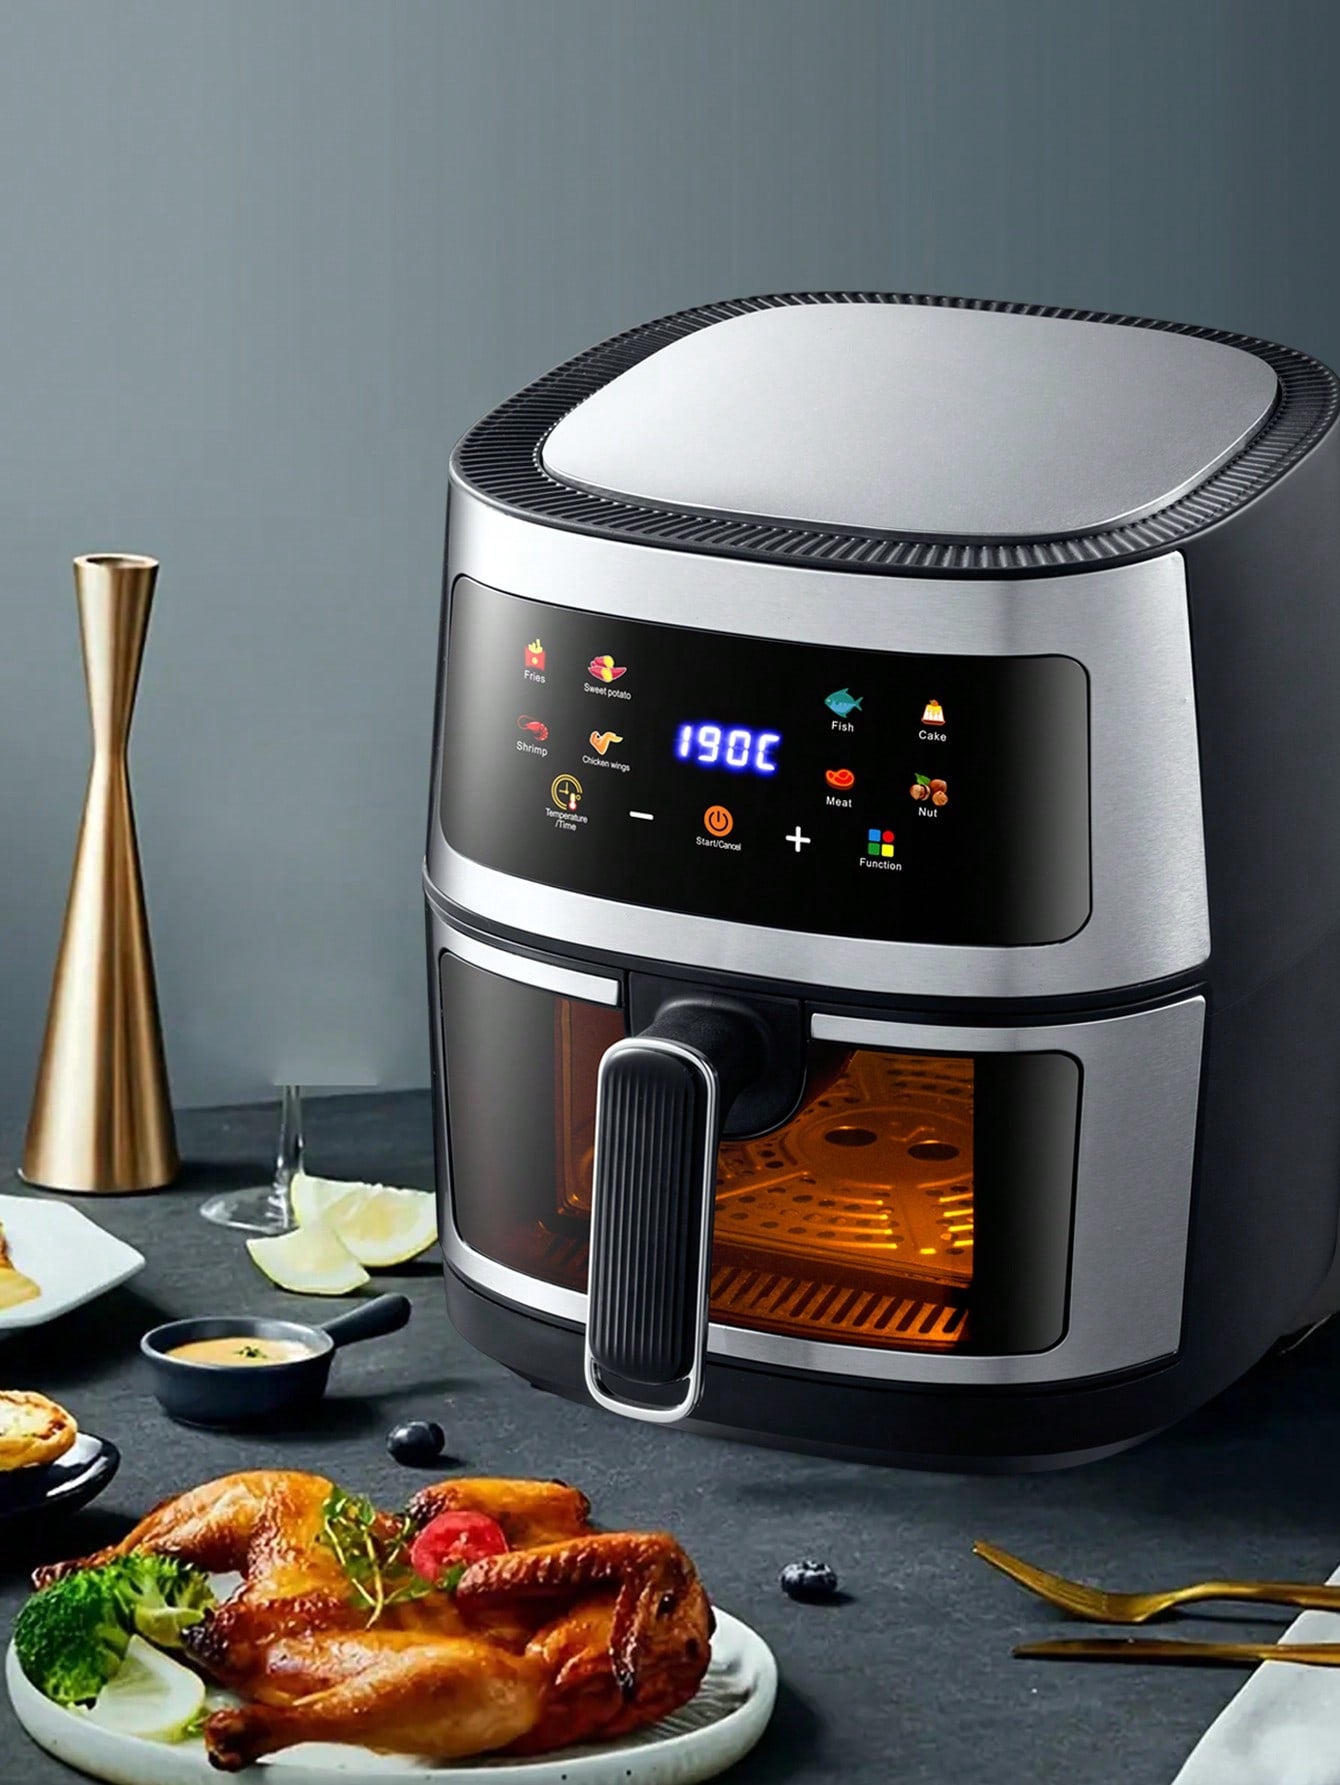 1PC 5L Large Capacity Smart Air Fryer With Touch Digital Screen Controls  Multi-function Oven